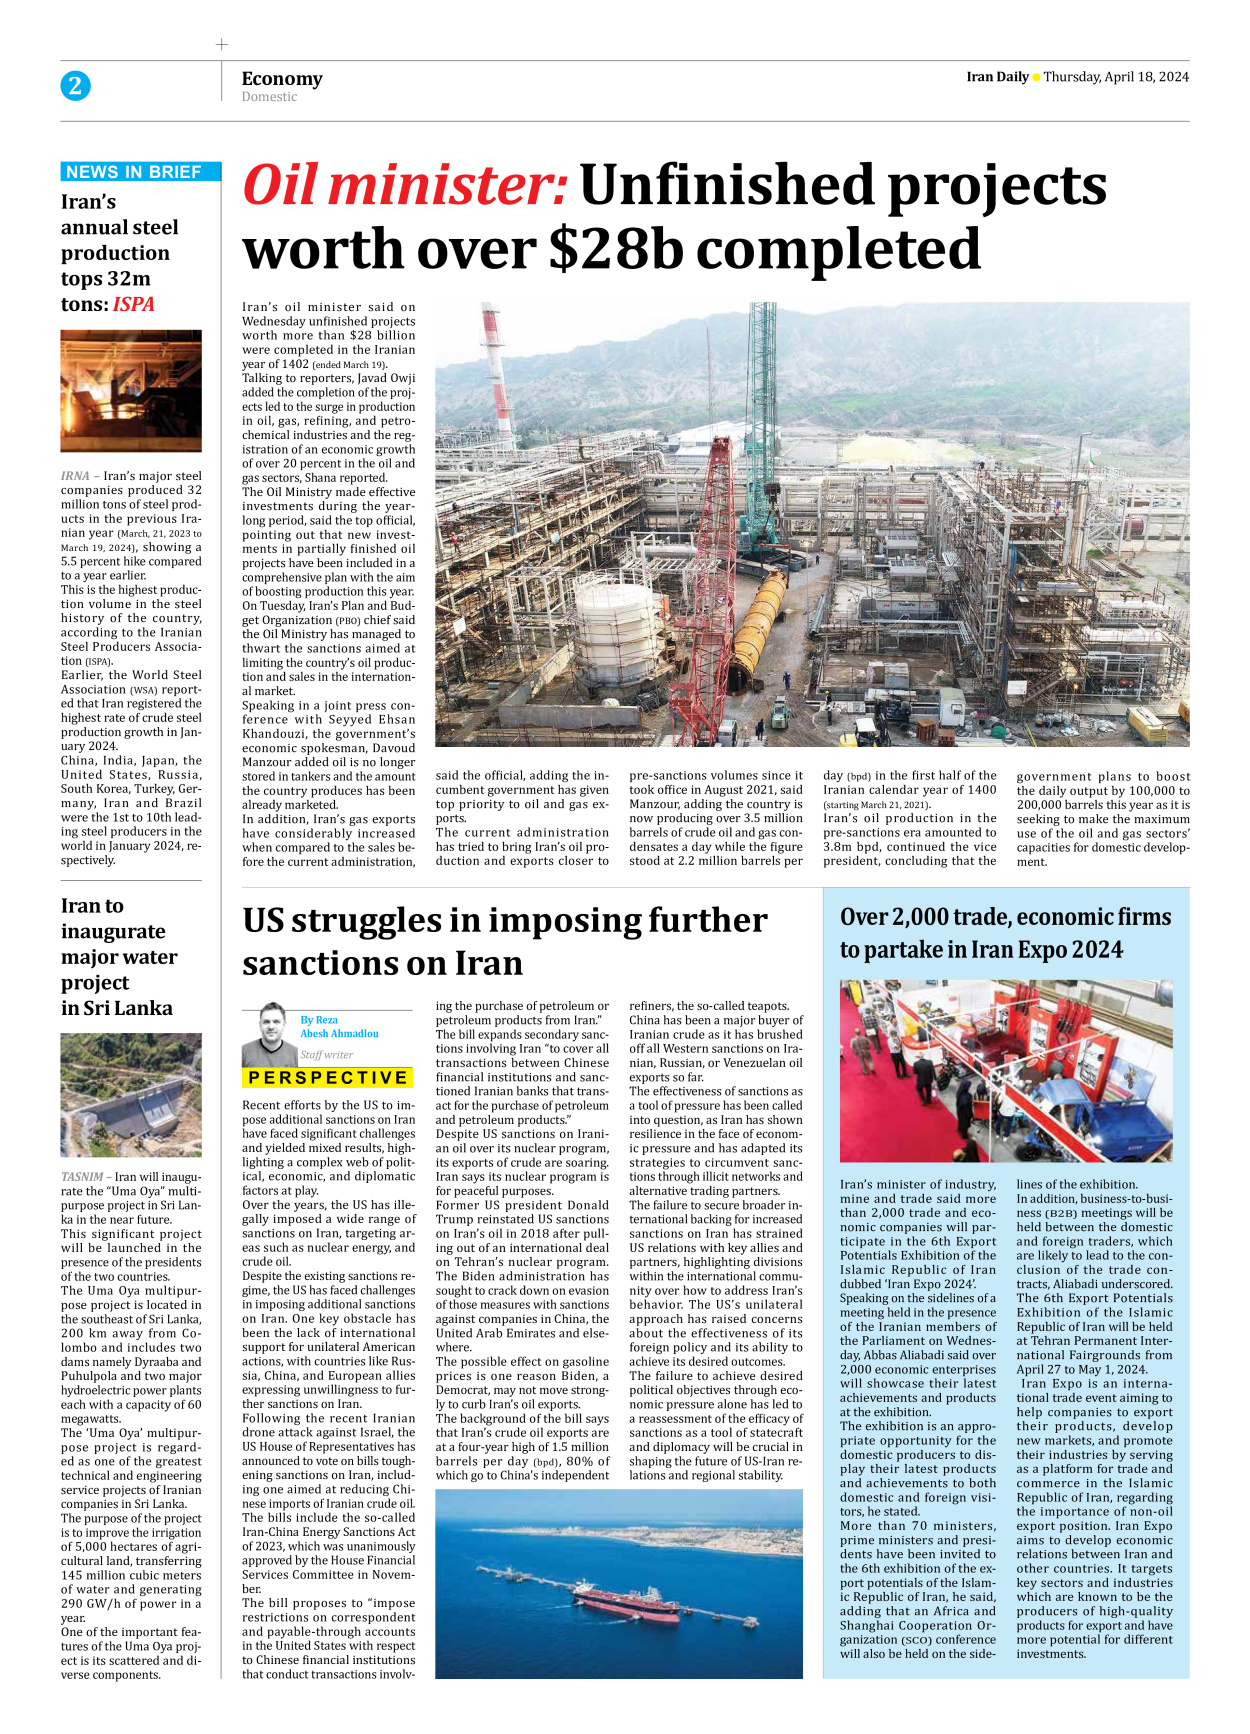 Iran Daily - Number Seven Thousand Five Hundred and Thirty Six - 18 April 2024 - Page 2